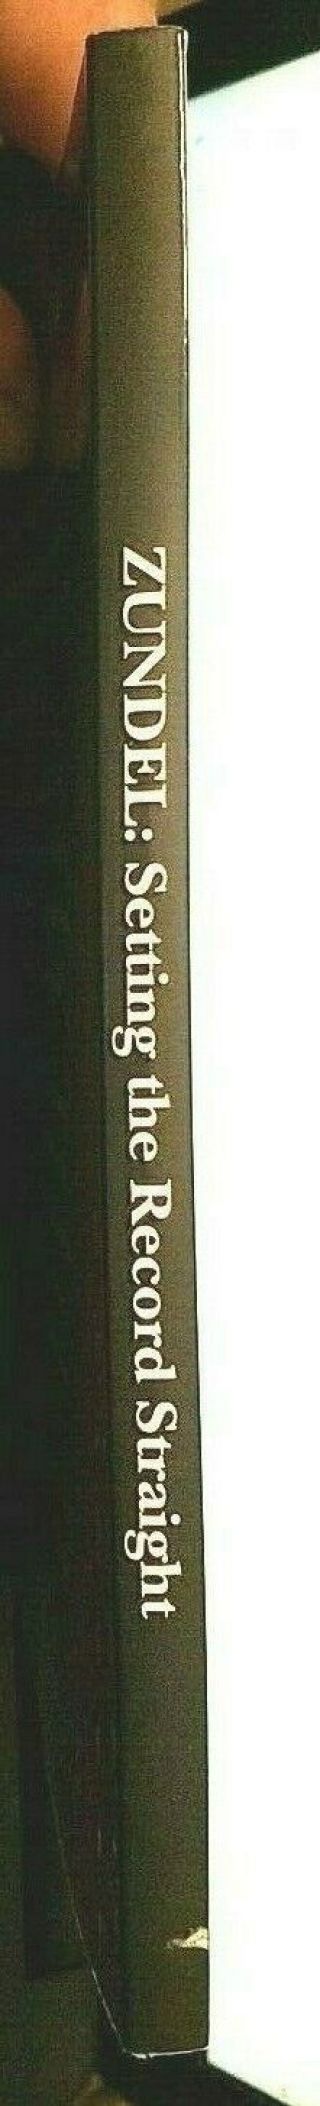 Ernst ZUNDEL / Setting the Record Straight Letters from Cell 7 / 1st Ed PB 1994 3